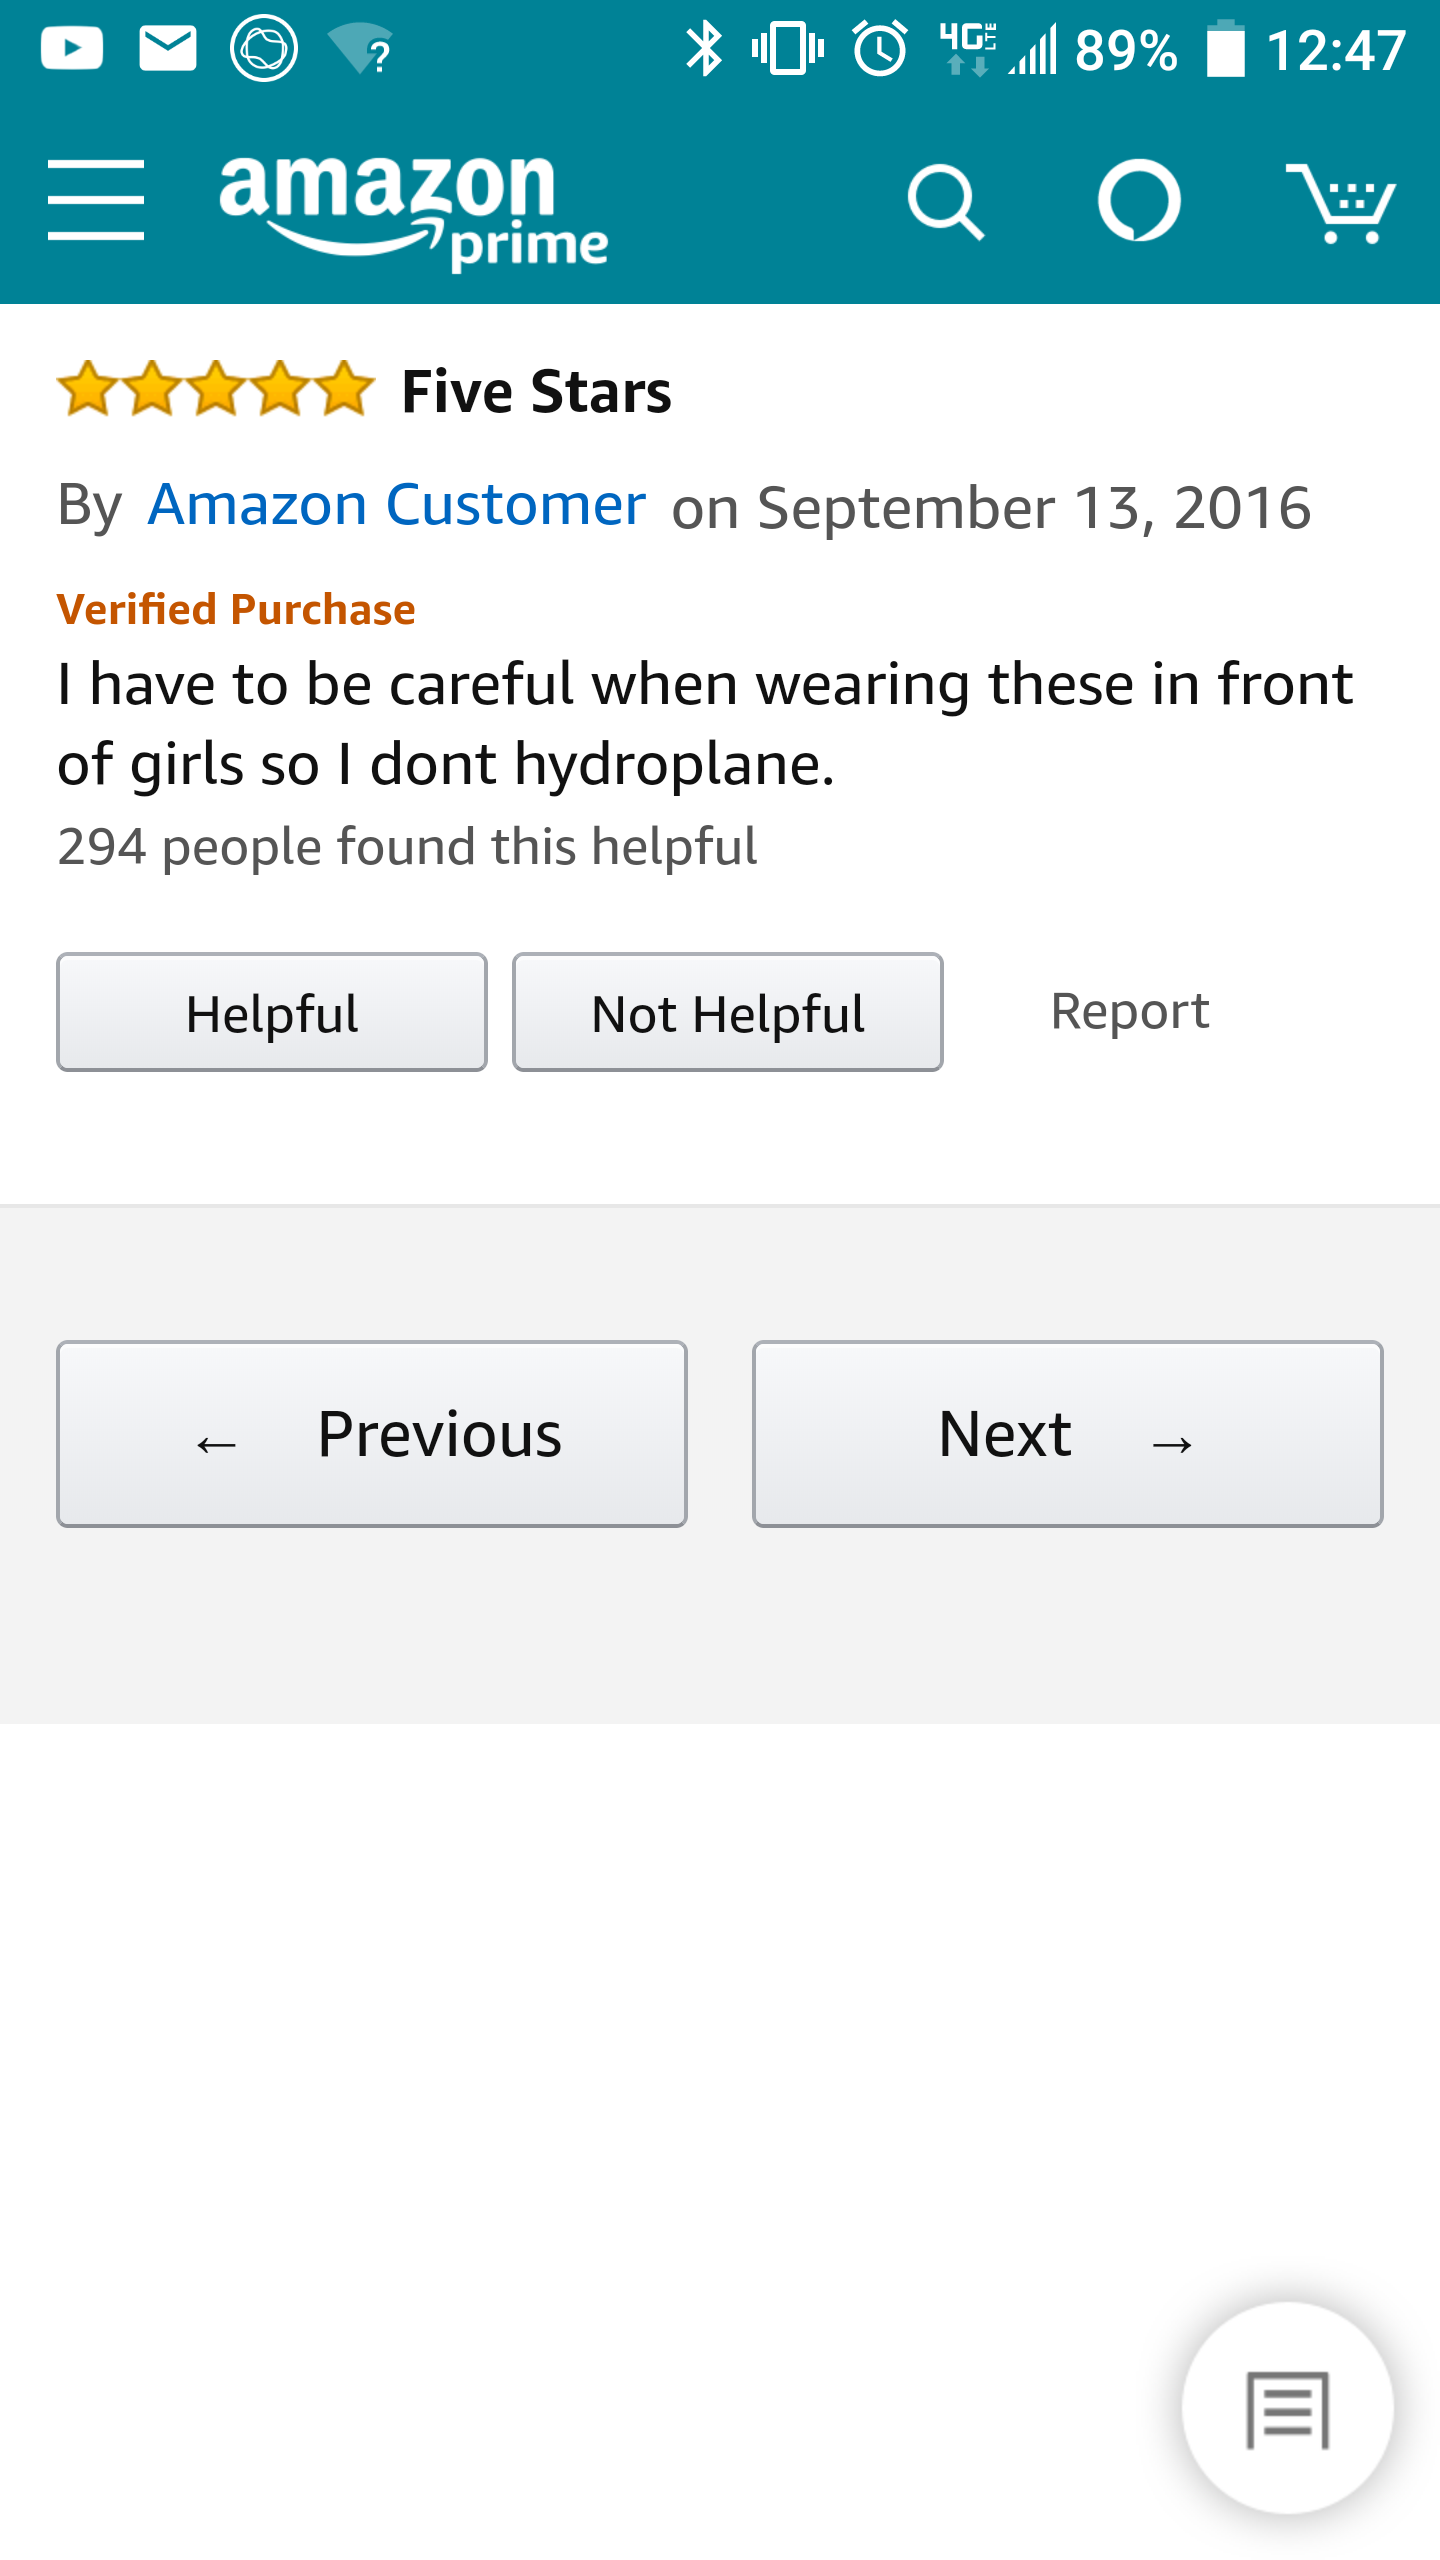 Saw this review on Amazon for a pair of Men's Heelys.